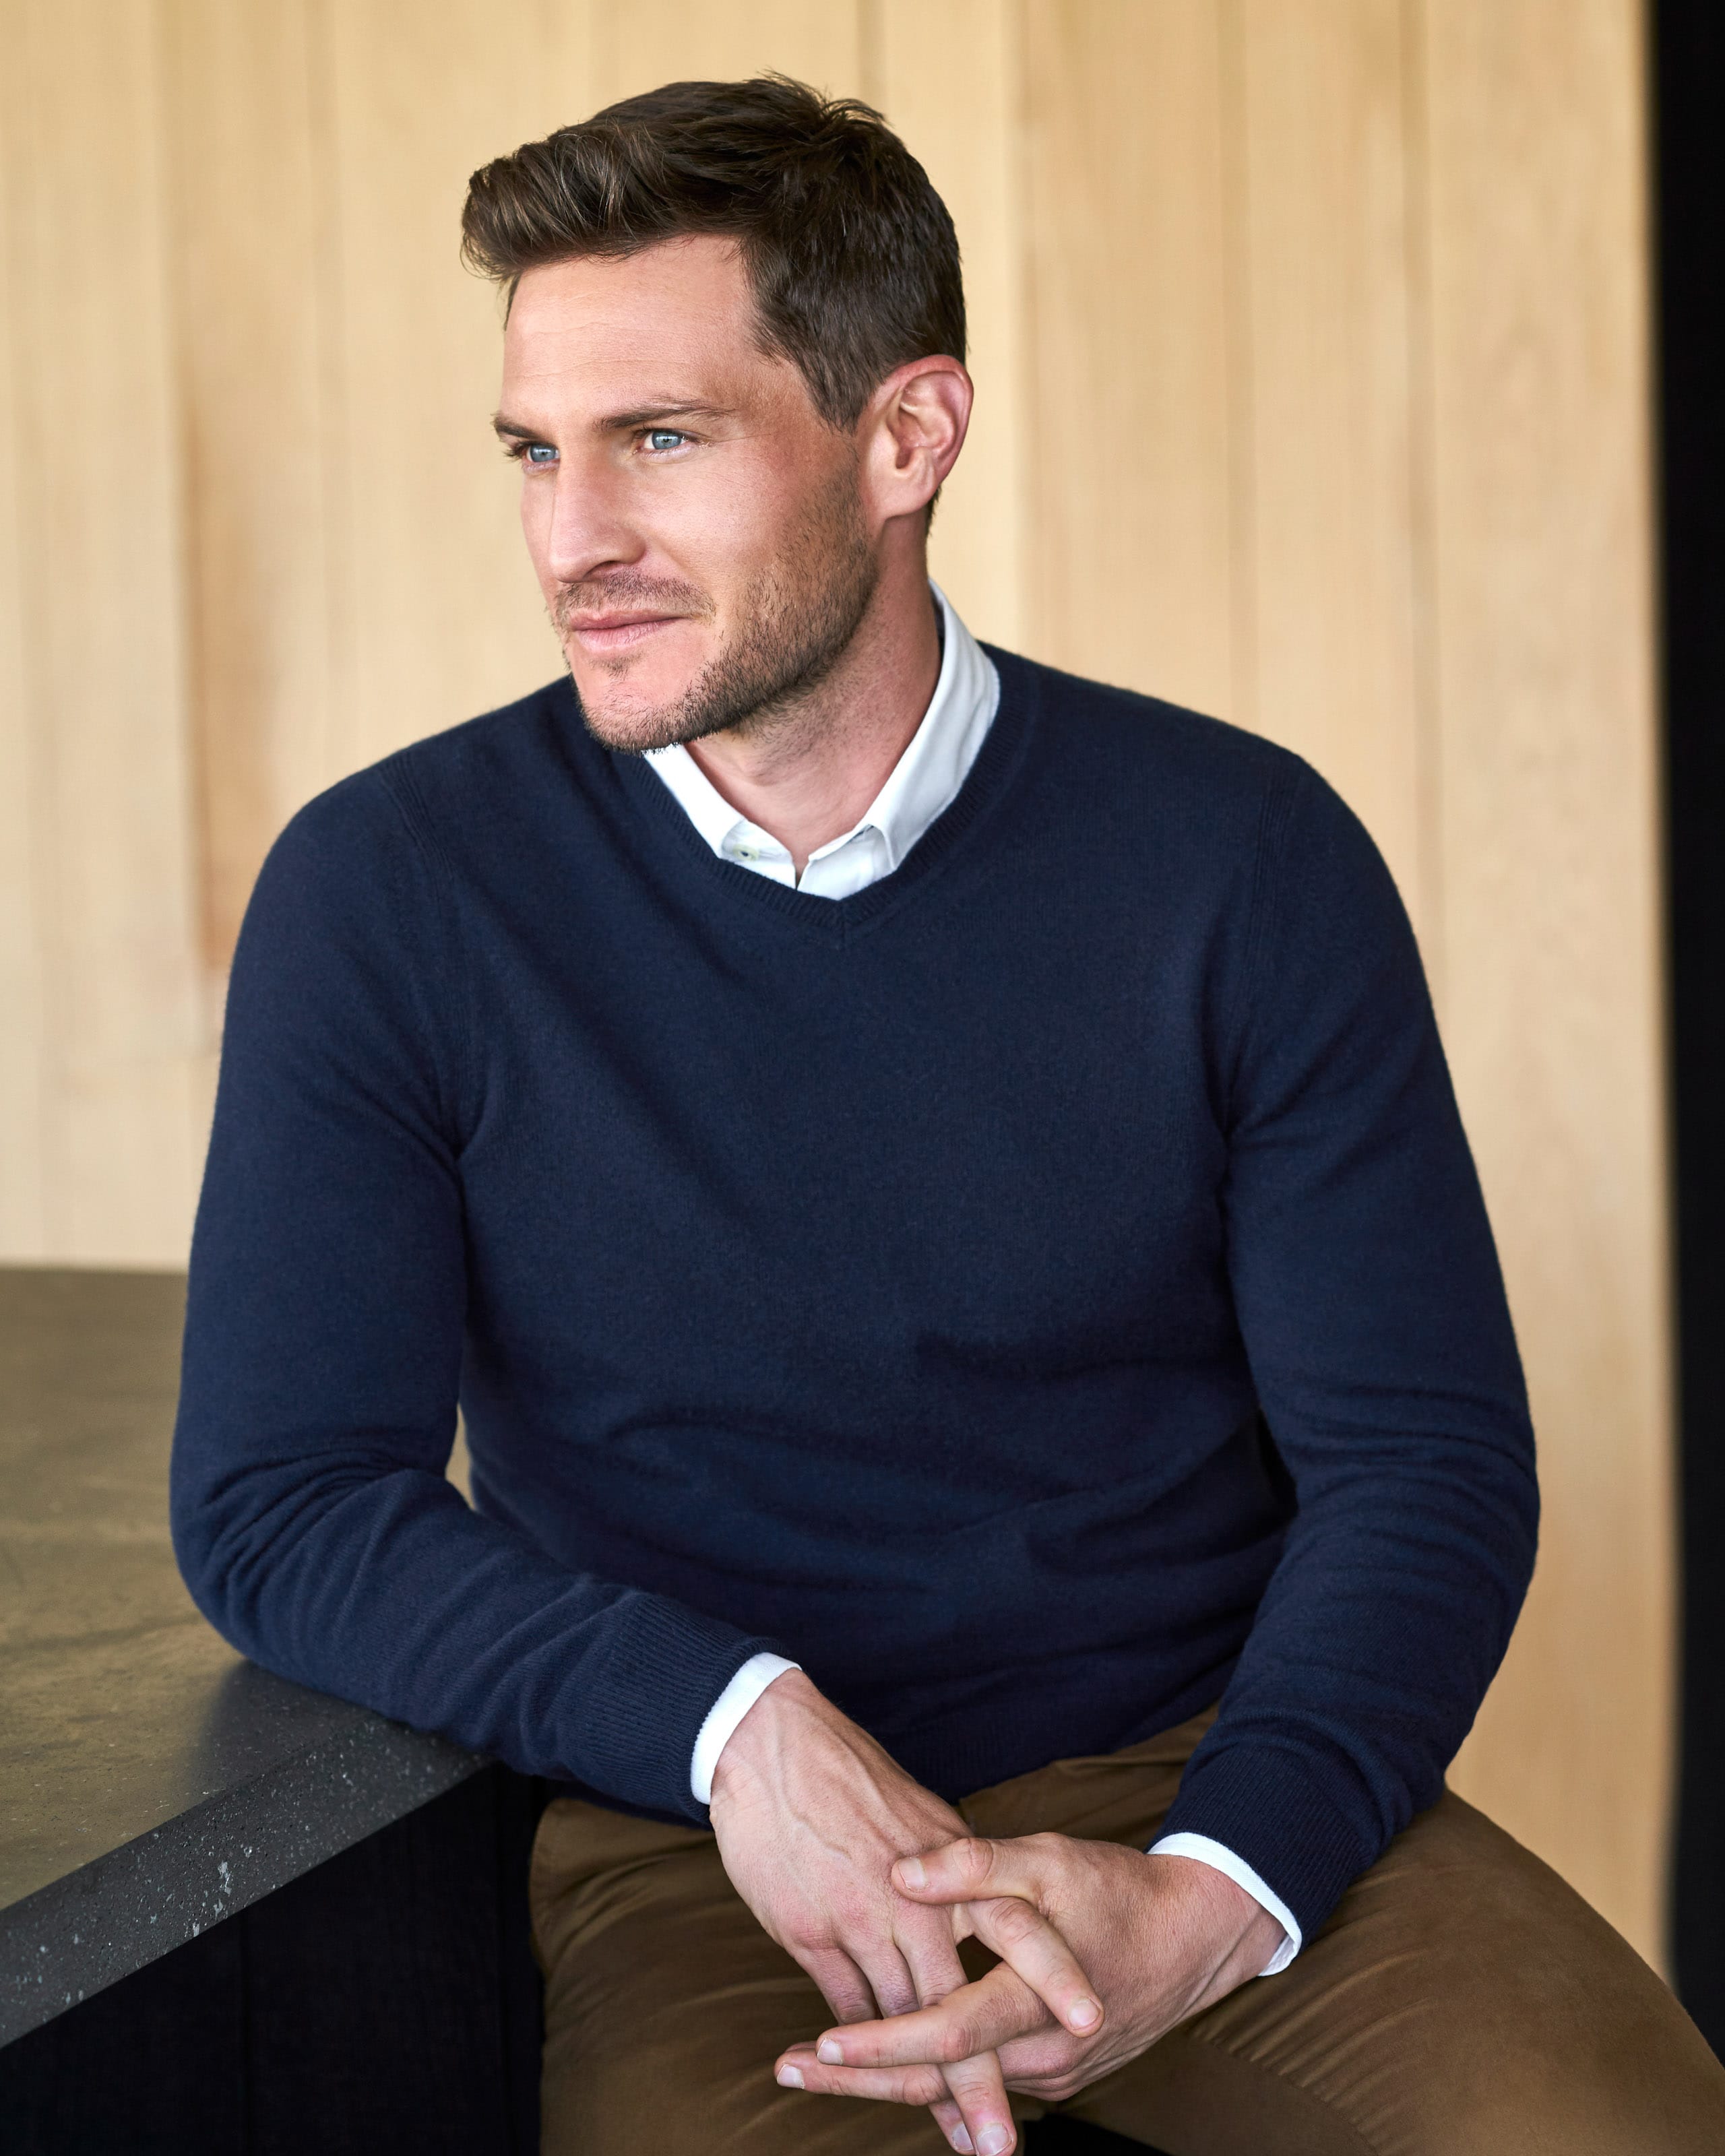 Men's Sweaters | Natural Wool Sweaters | WoolOvers US - Page 2